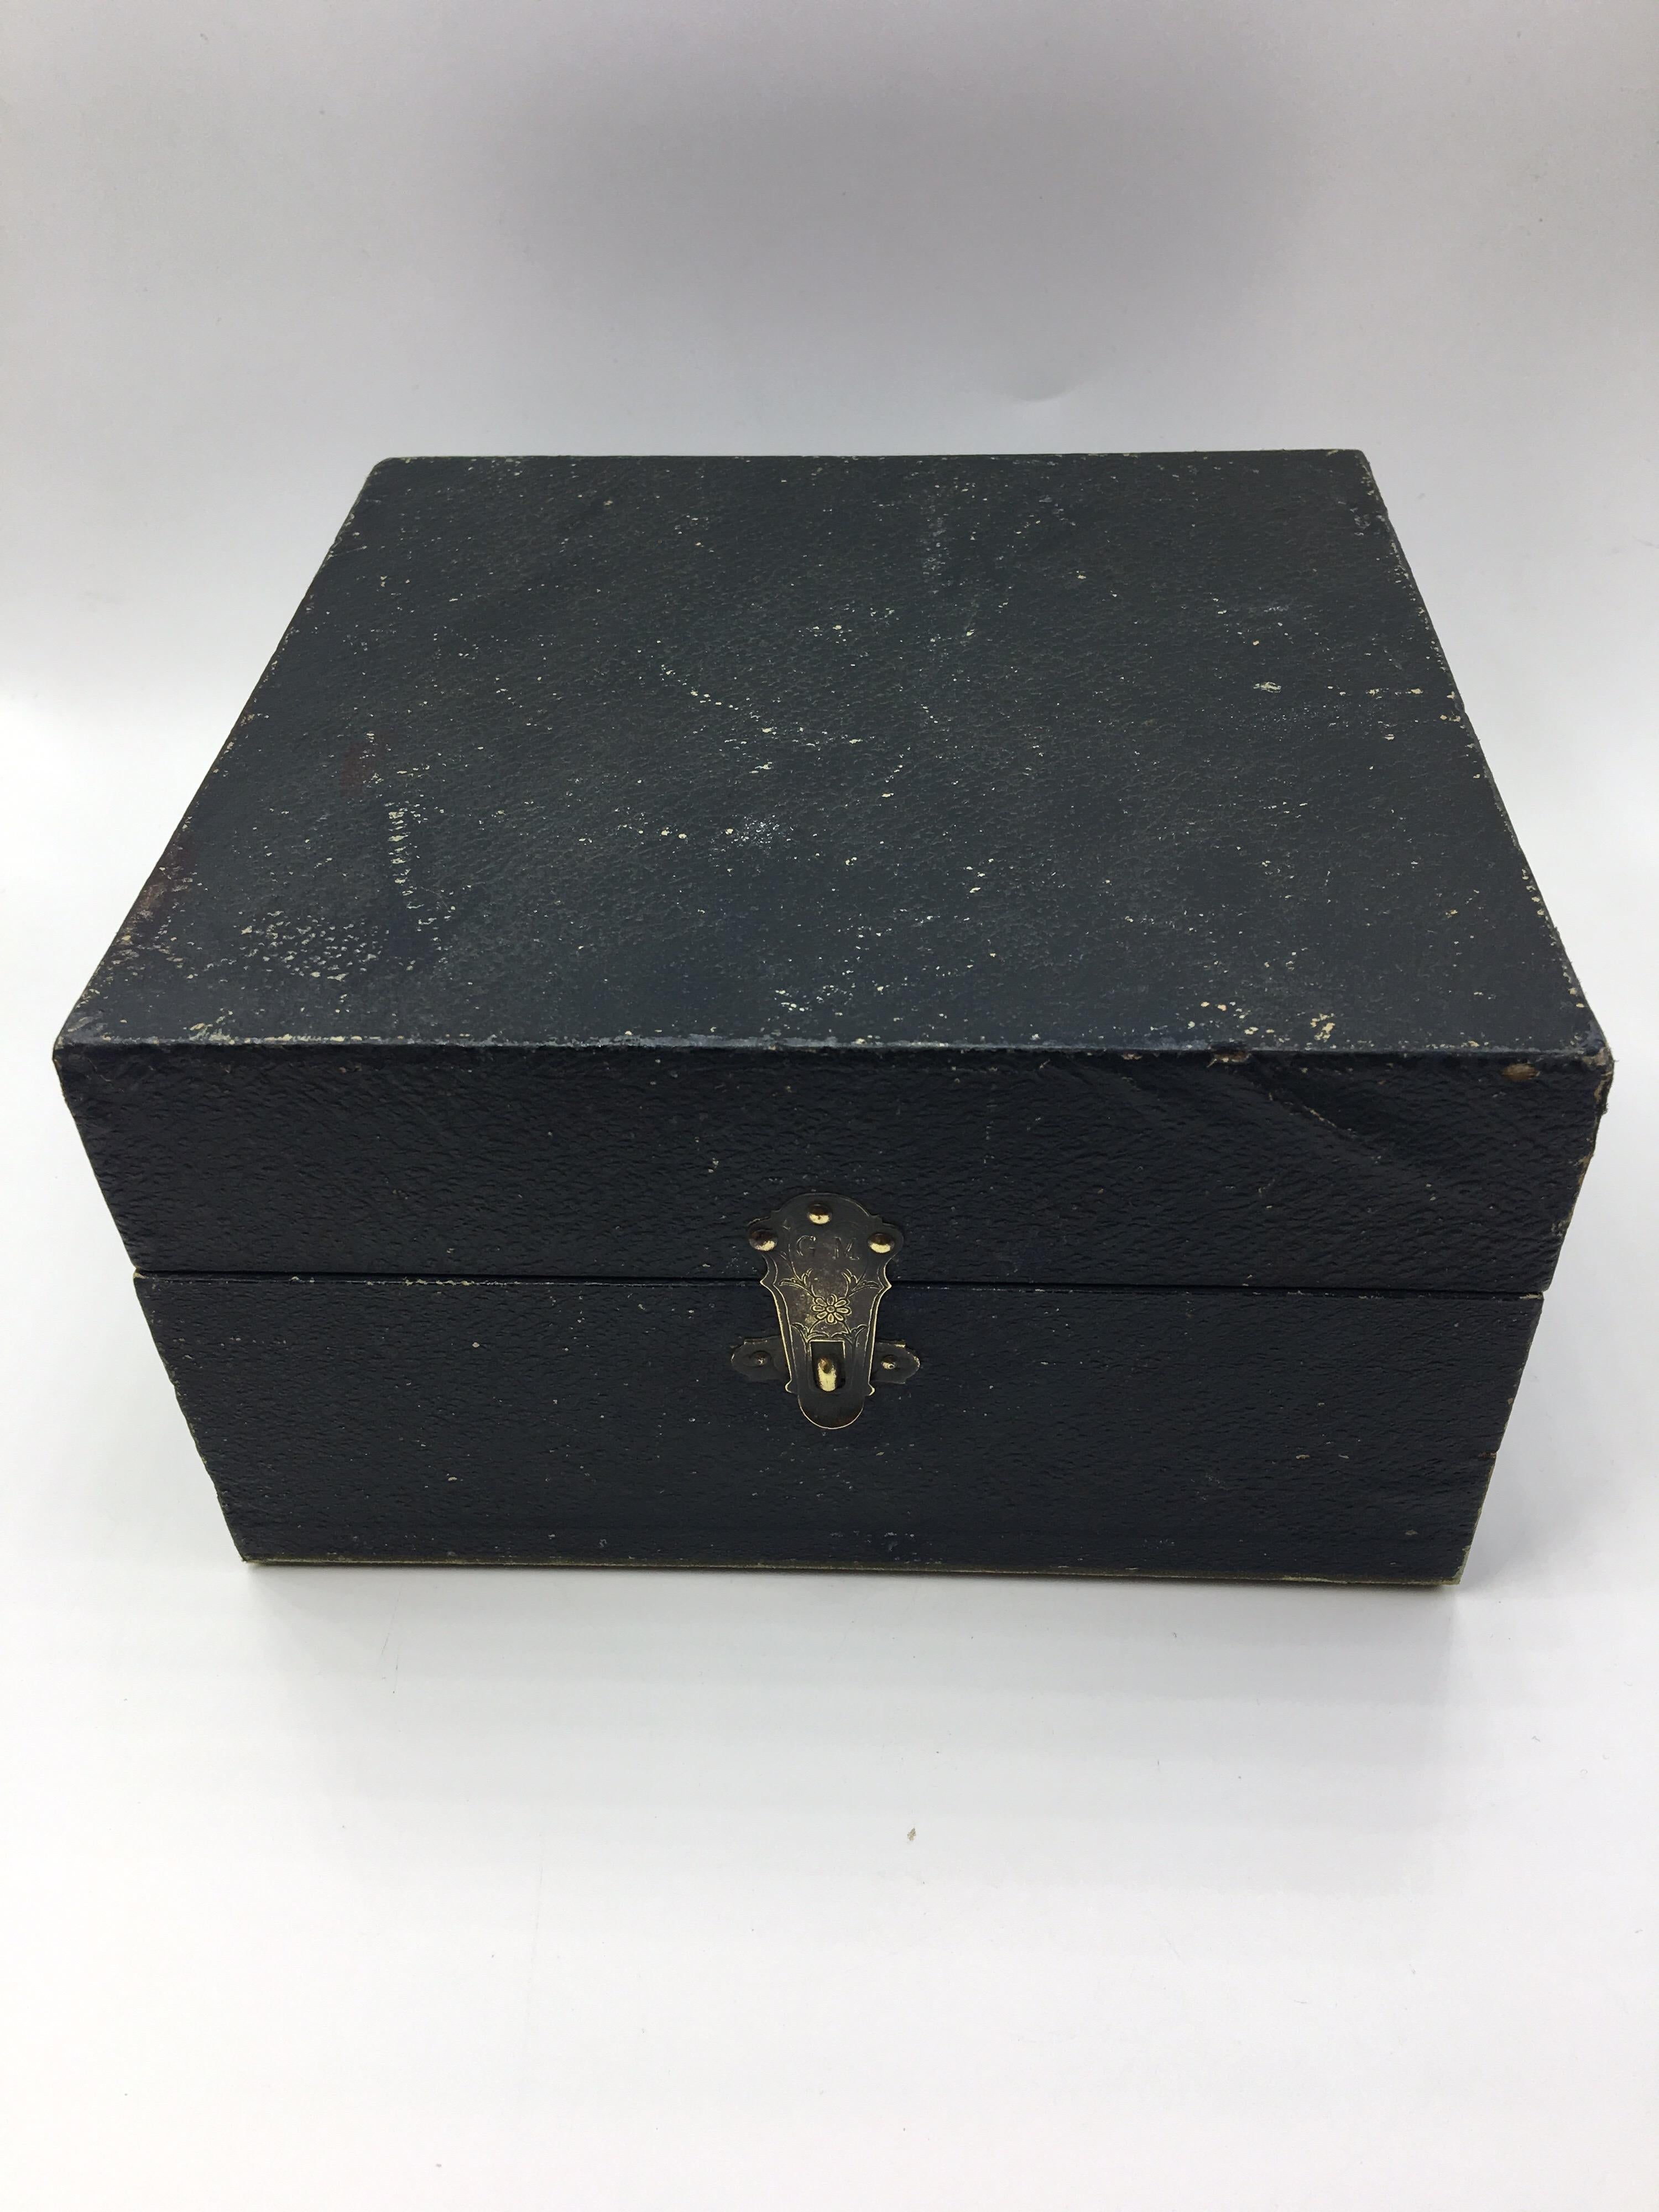 Very rare 19th century cigarette machine with original box, Du Siecle.
Antique French cigarette rolling machine, this machine works very well with s packs of original rolling paper (extra fine century paper) with a compartment for tobacco and